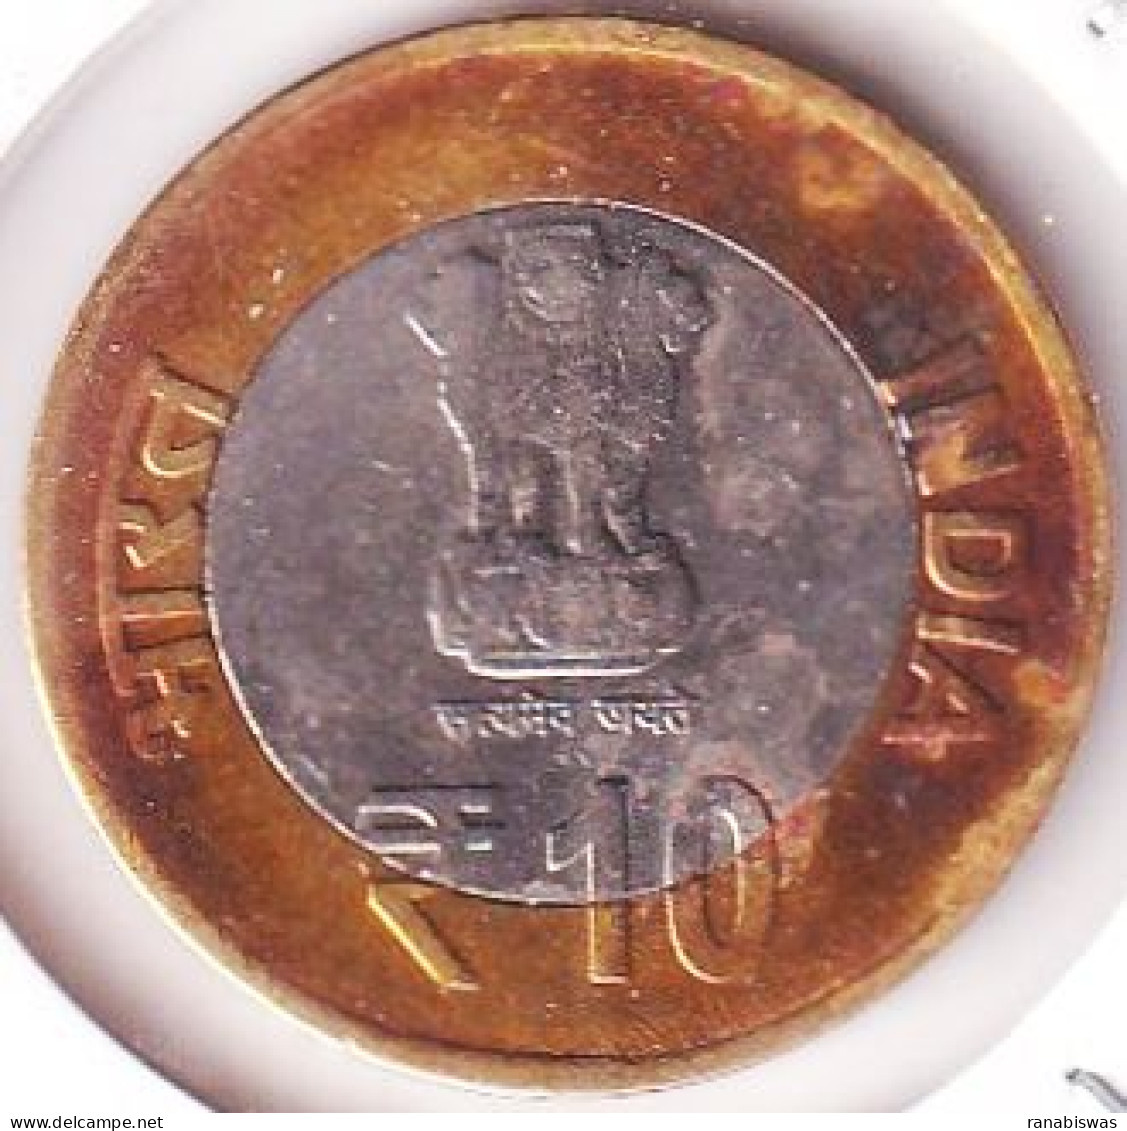 INDIA COIN LOT 451, 10 RUPEES 2015, SWAMI CHINMAYANANDA, BOMBAY MINT, XF - Inde